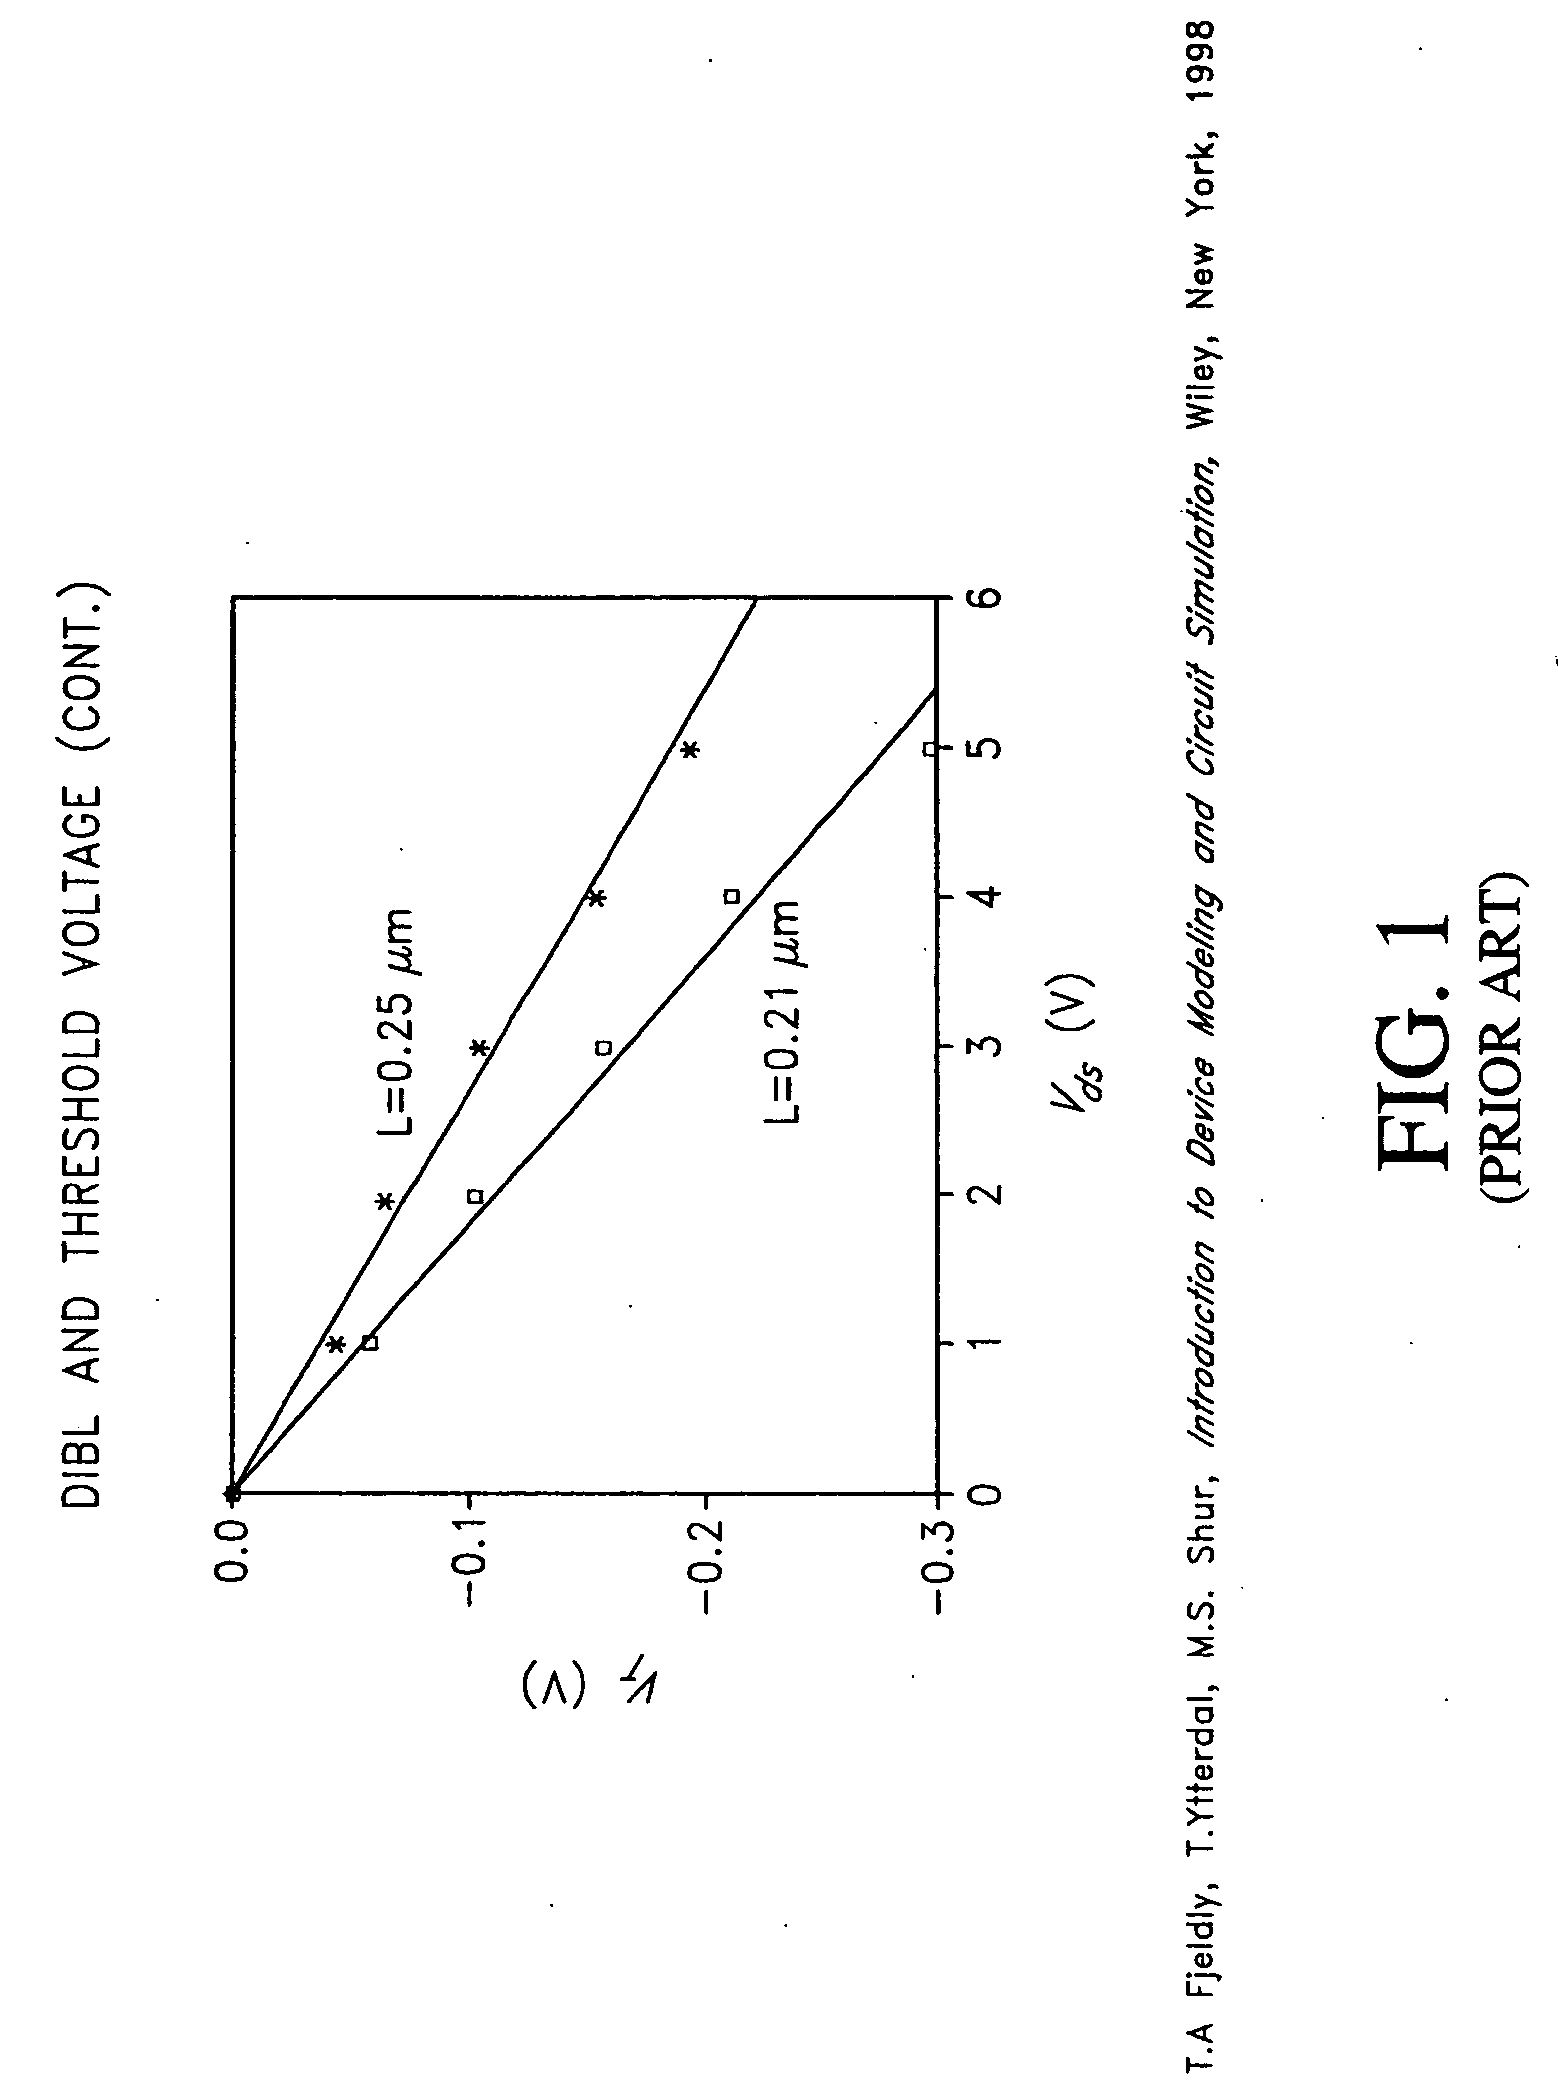 SOI device with reduced drain induced barrier lowering